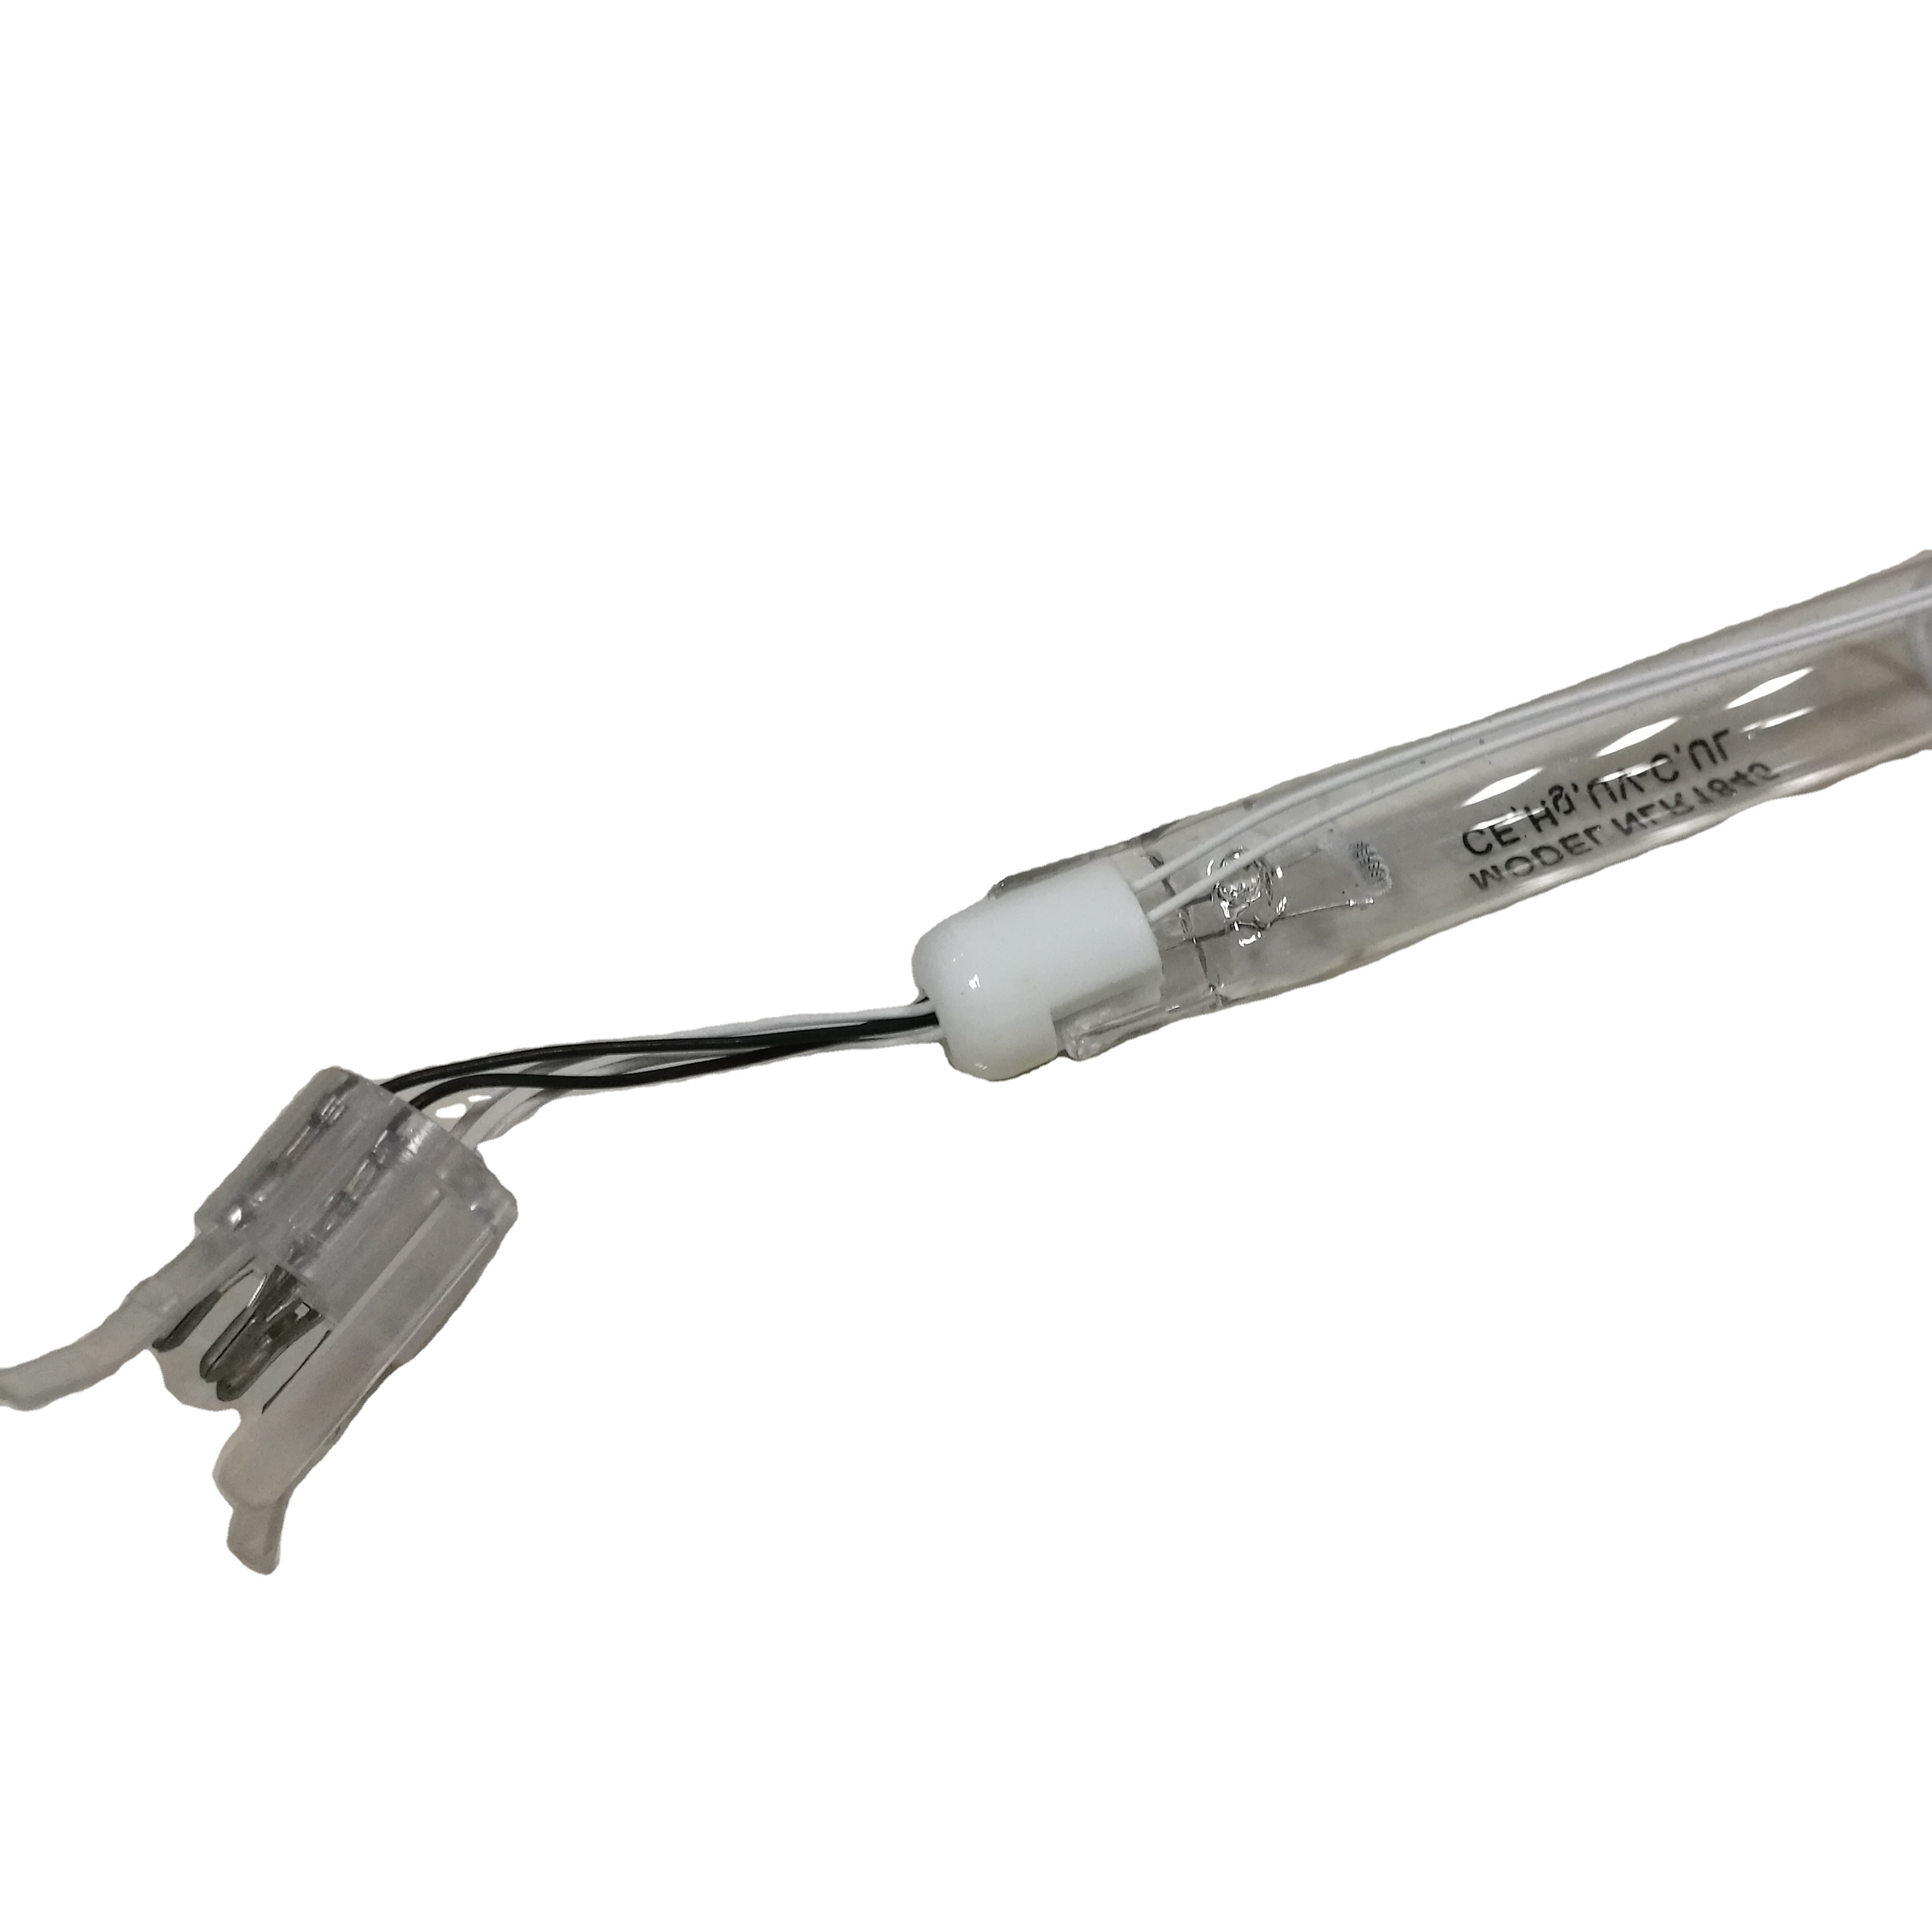 Wedeco XLR5 Equivalent Replacement UV Lamp